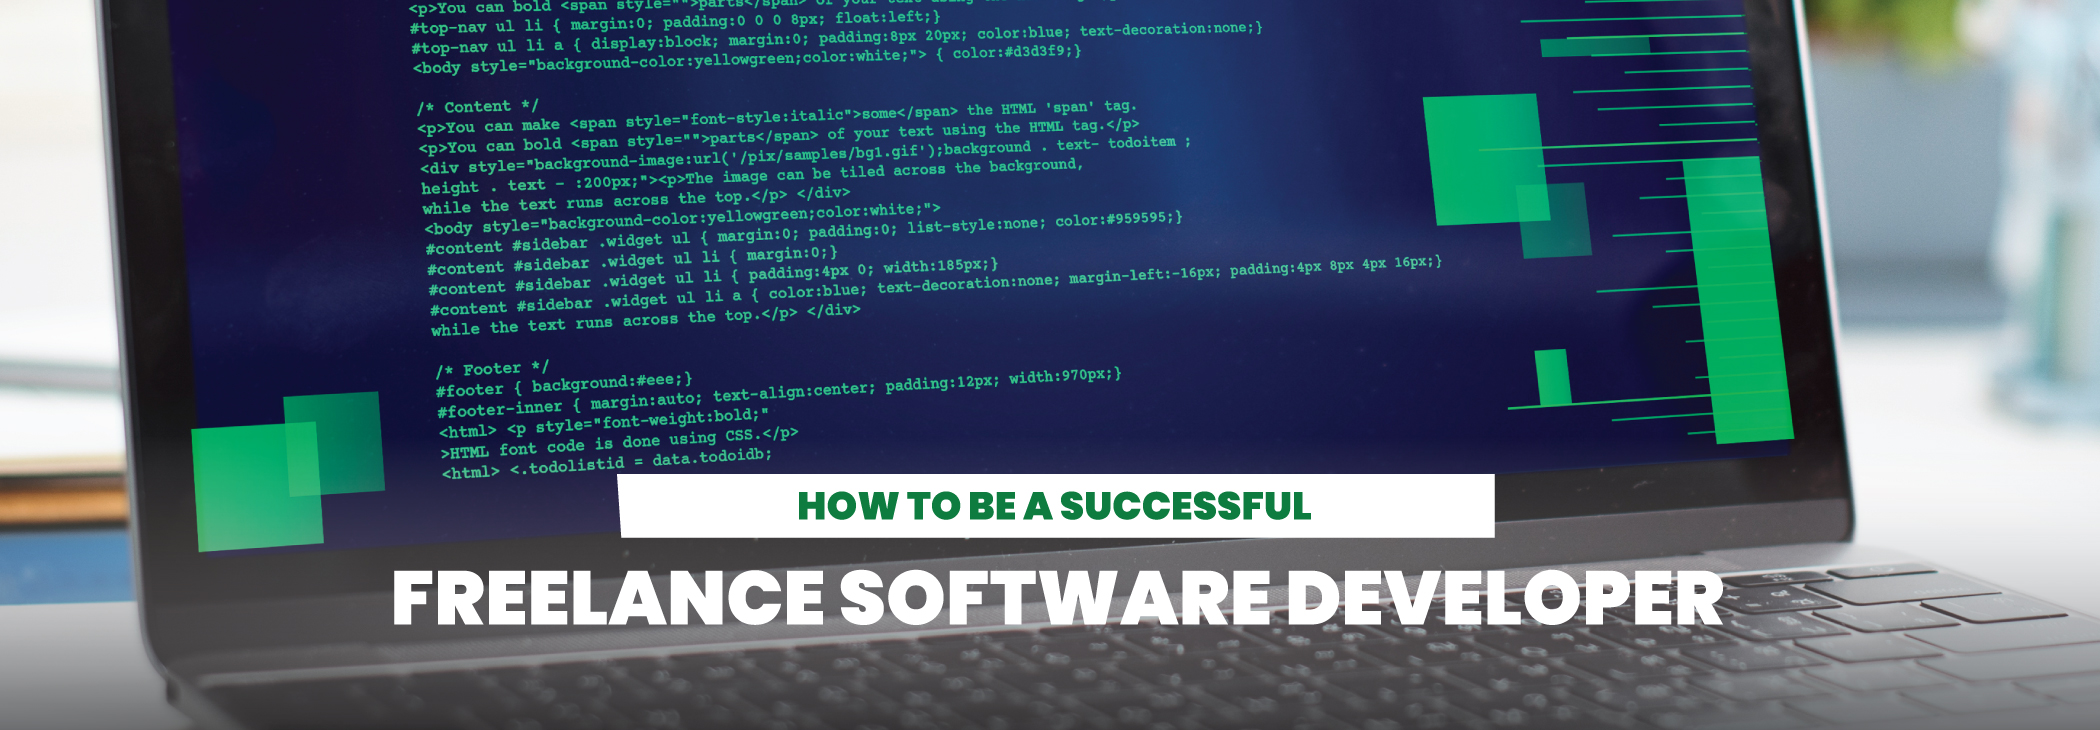 Steps To Becoming A Better Freelance Software Developer